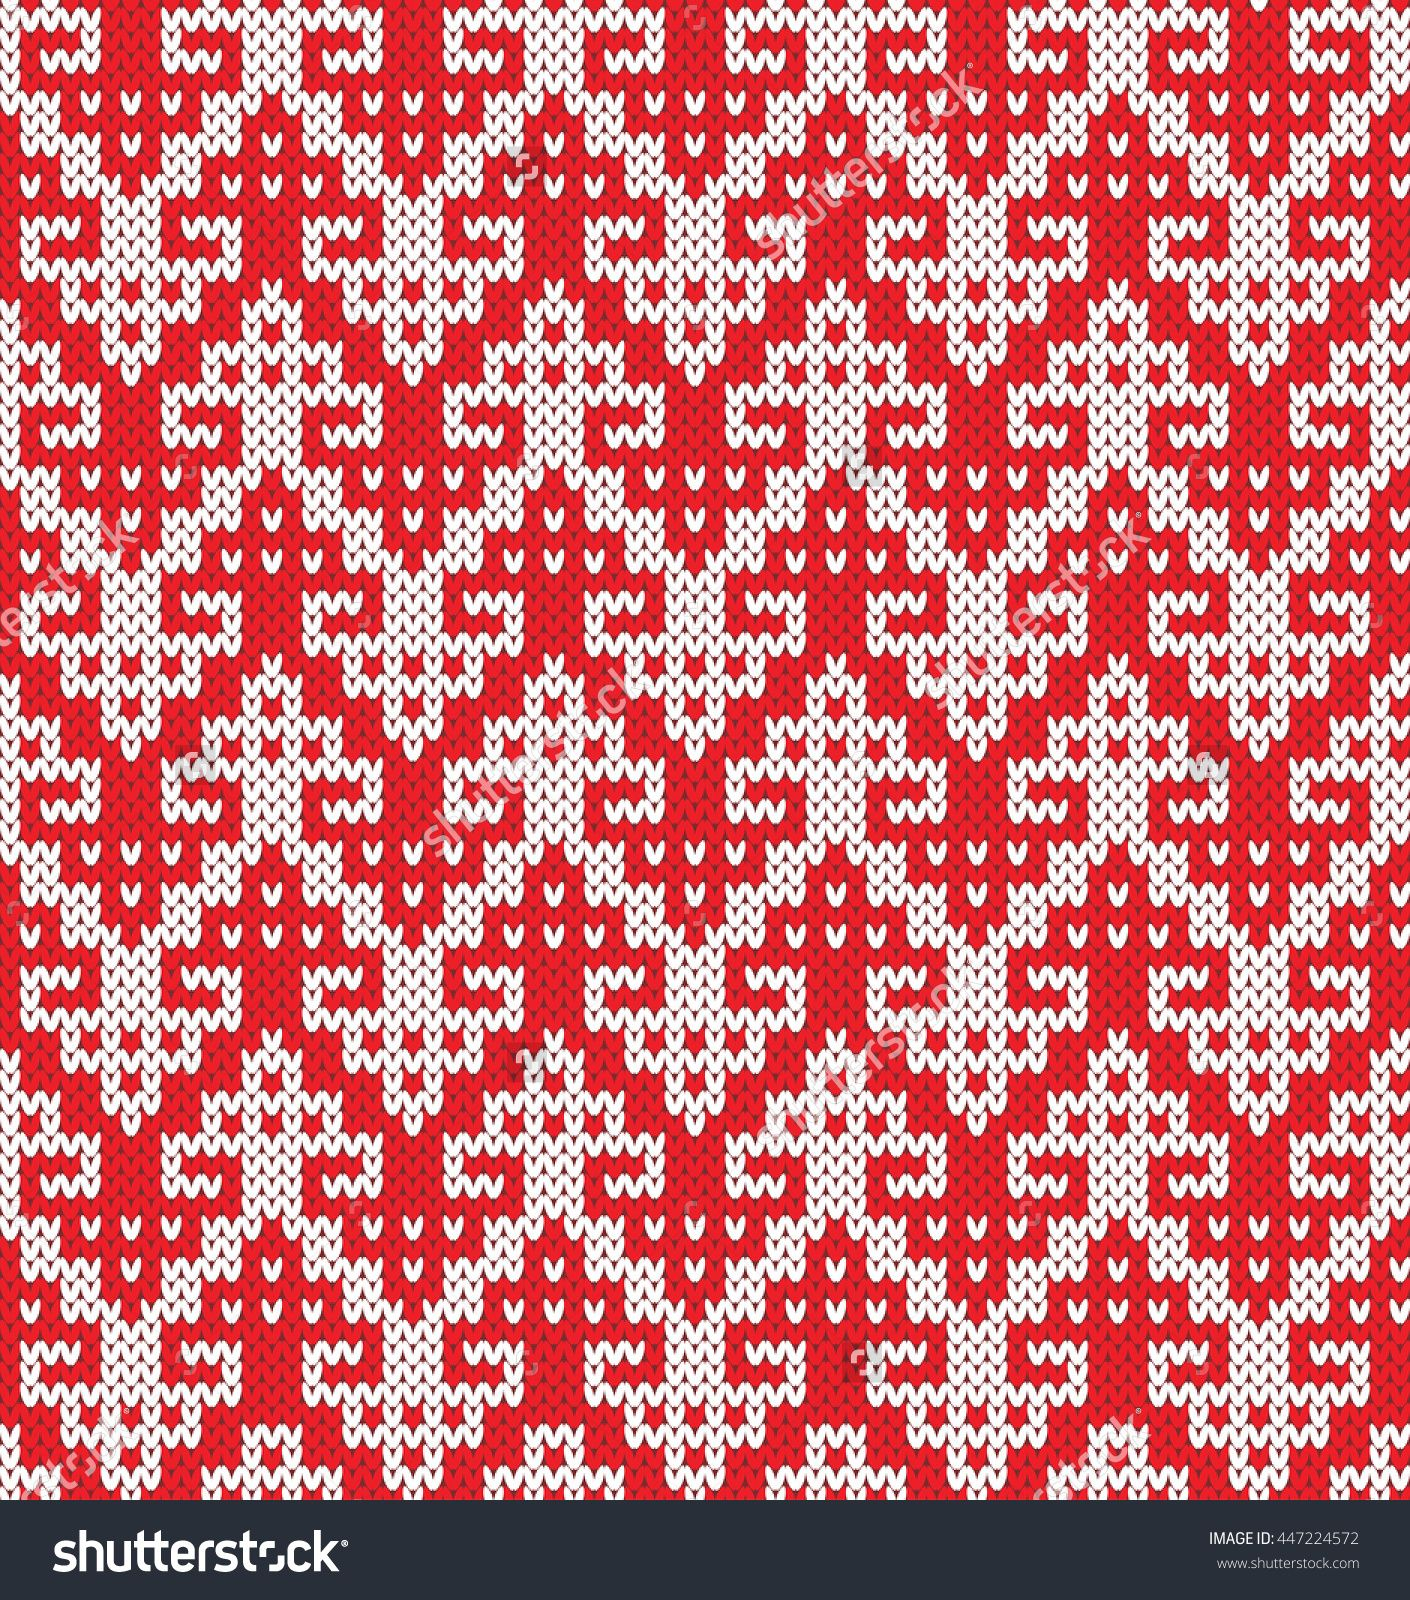 Seamless Knitting Patterns Jacquard Pattern Vector At Getdrawings Free For Personal Use